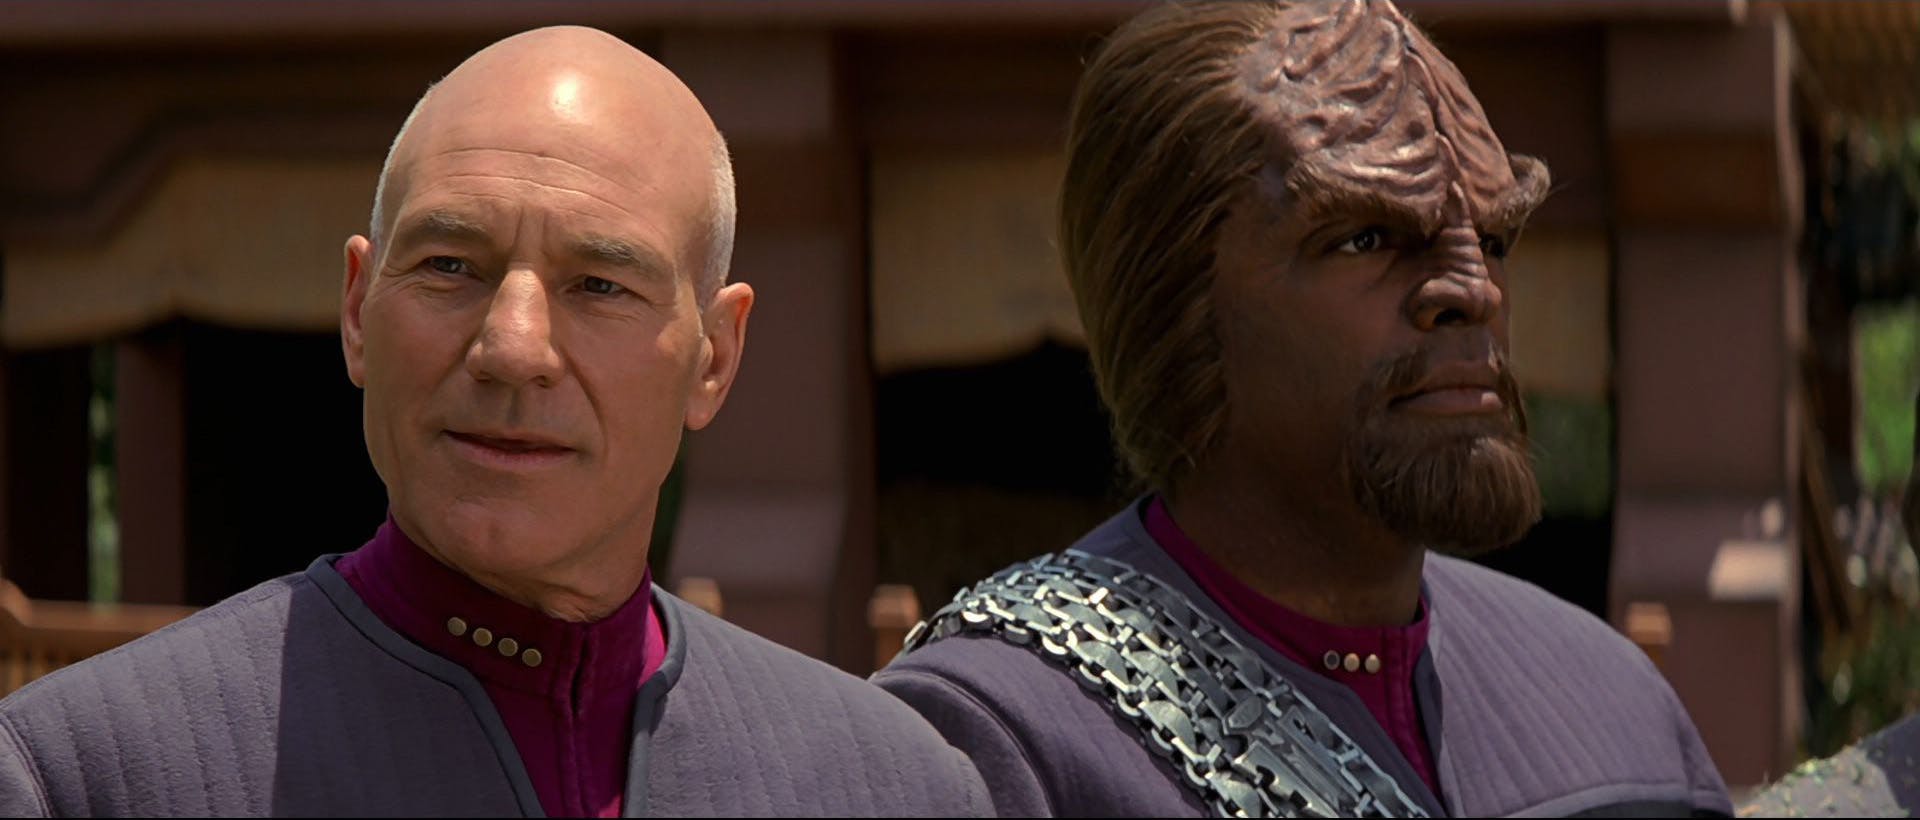 On the surface of Ba'ku, Jean-Luc Picard grins as Worf looks straight ahead in Star Trek: Insurrection